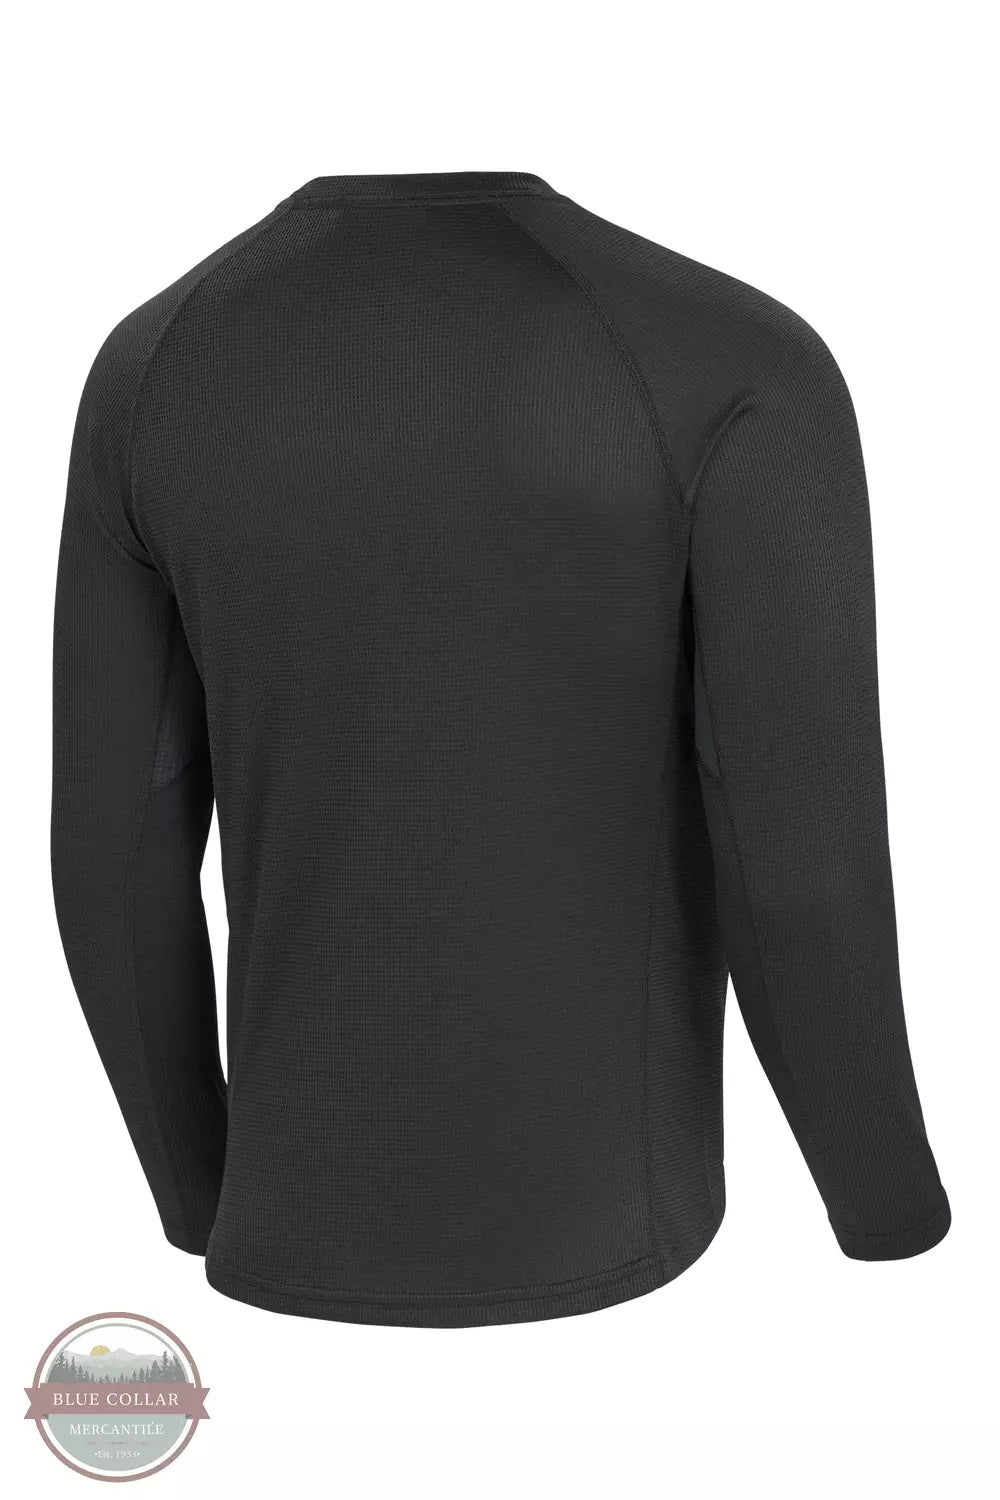 Carhartt UM0223M Force Midweight Micro-Grid Long Sleeve Base Layer Top Black Back View